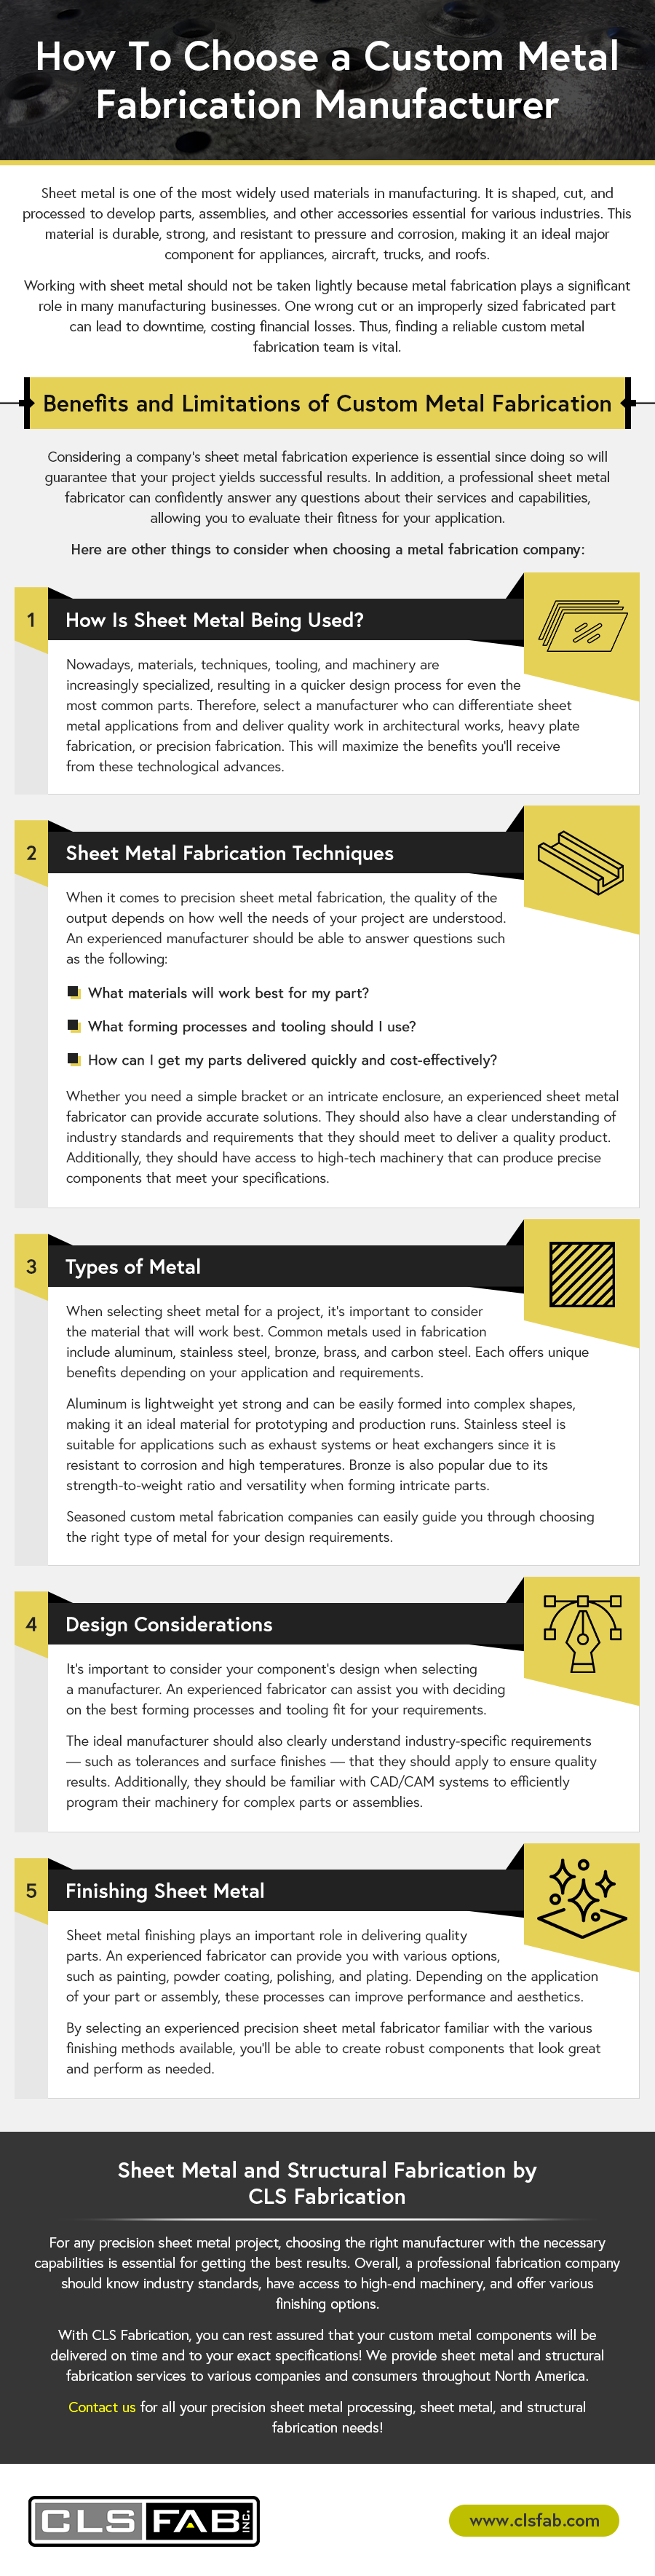 How-To-Choose-a-Custom-Metal-Fabrication-Manufacturer